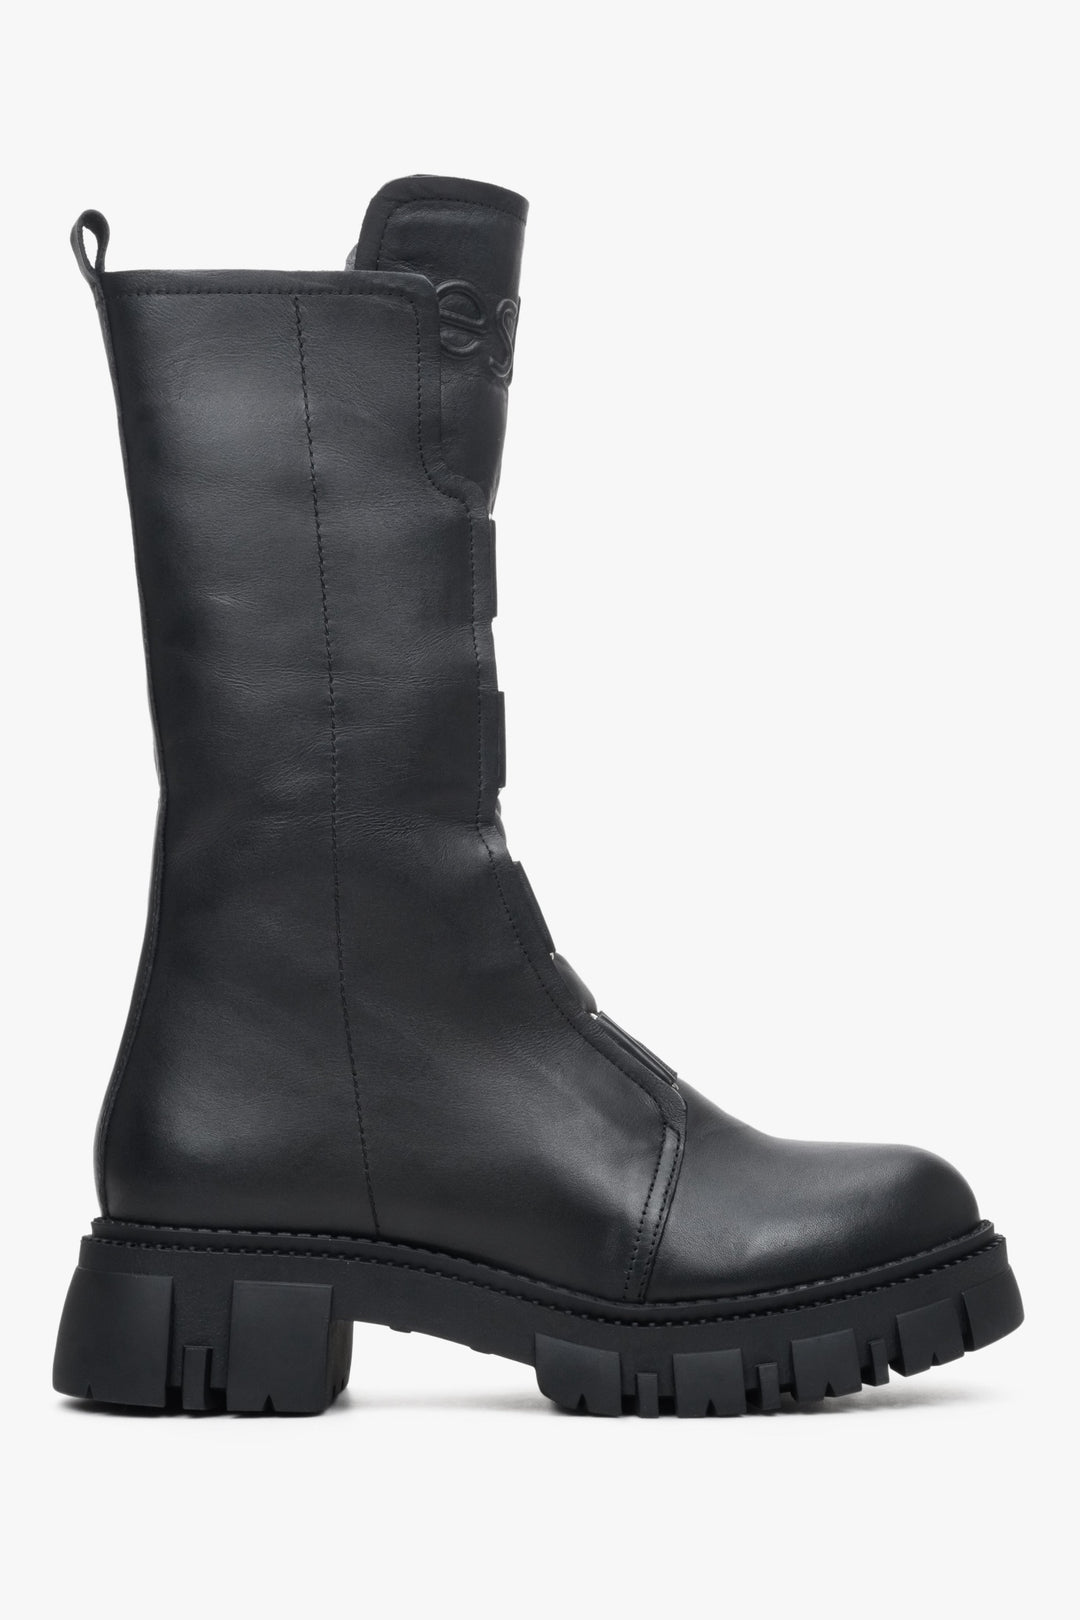 High black women's leather ankle boots by Estro with an elastic insert.